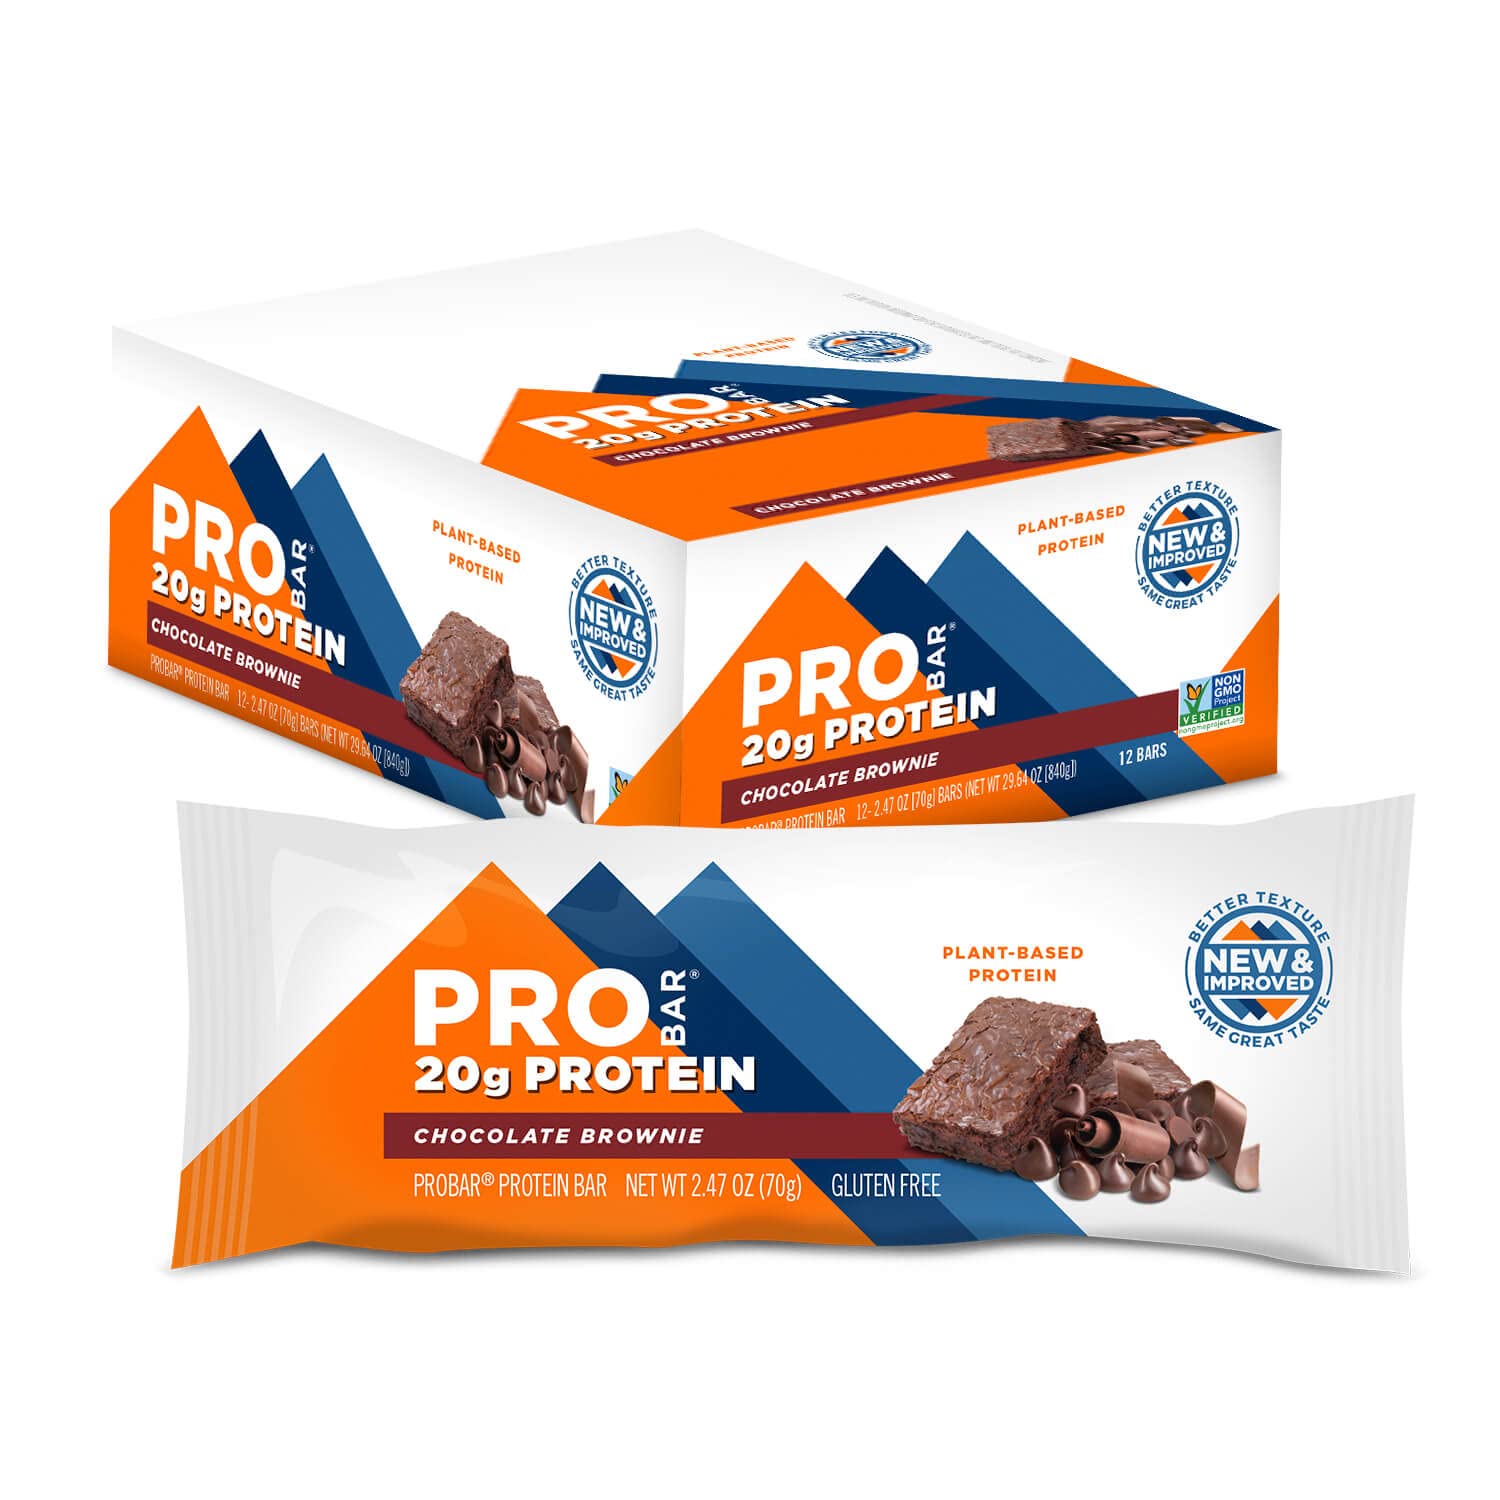 PROBAR - PROTEIN Bar, Chocolate Brownie, Non-GMO, Gluten-Free, Healthy, Plant-Based Whole Food Ingredients, Natural Energy (12 Count)